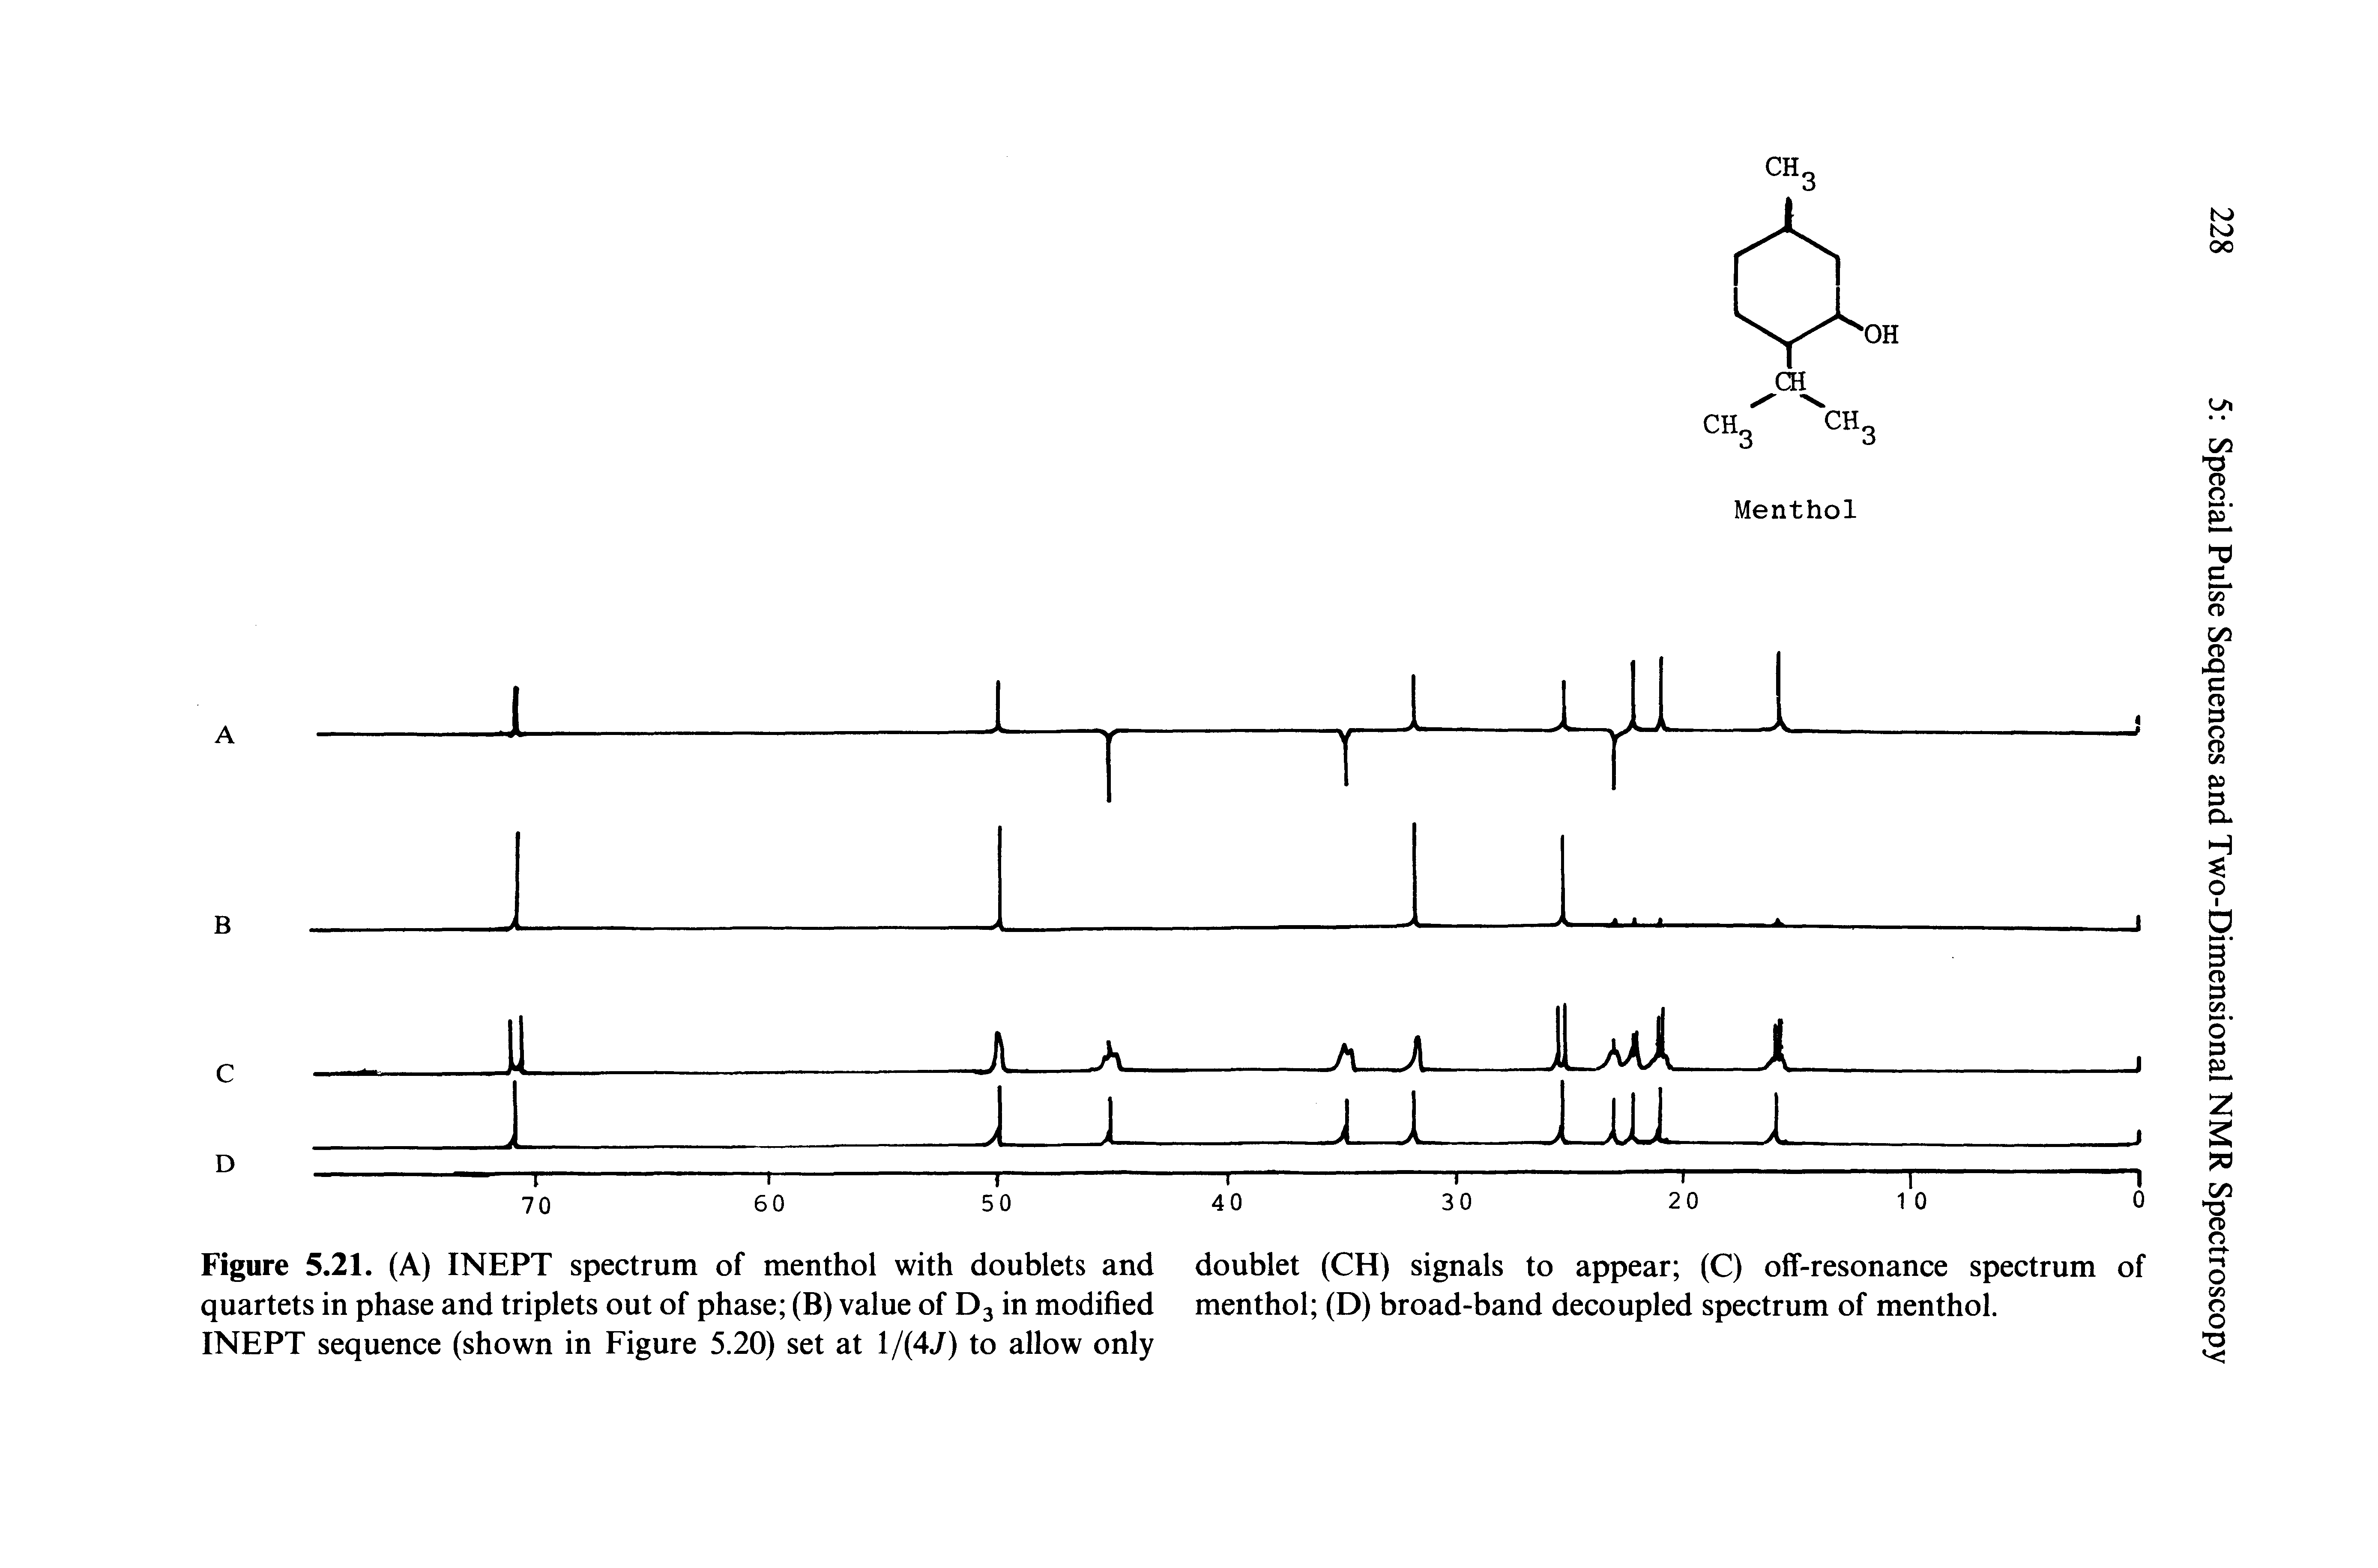 Figure 5.21. (A) INEPT spectrum of menthol with doublets and doublet (CH) signals to appear (C) off-resonance spectrum of quartets in phase and triplets out of phase (B) value of D3 in modified menthol (D) broad-band decoupled spectrum of menthol.